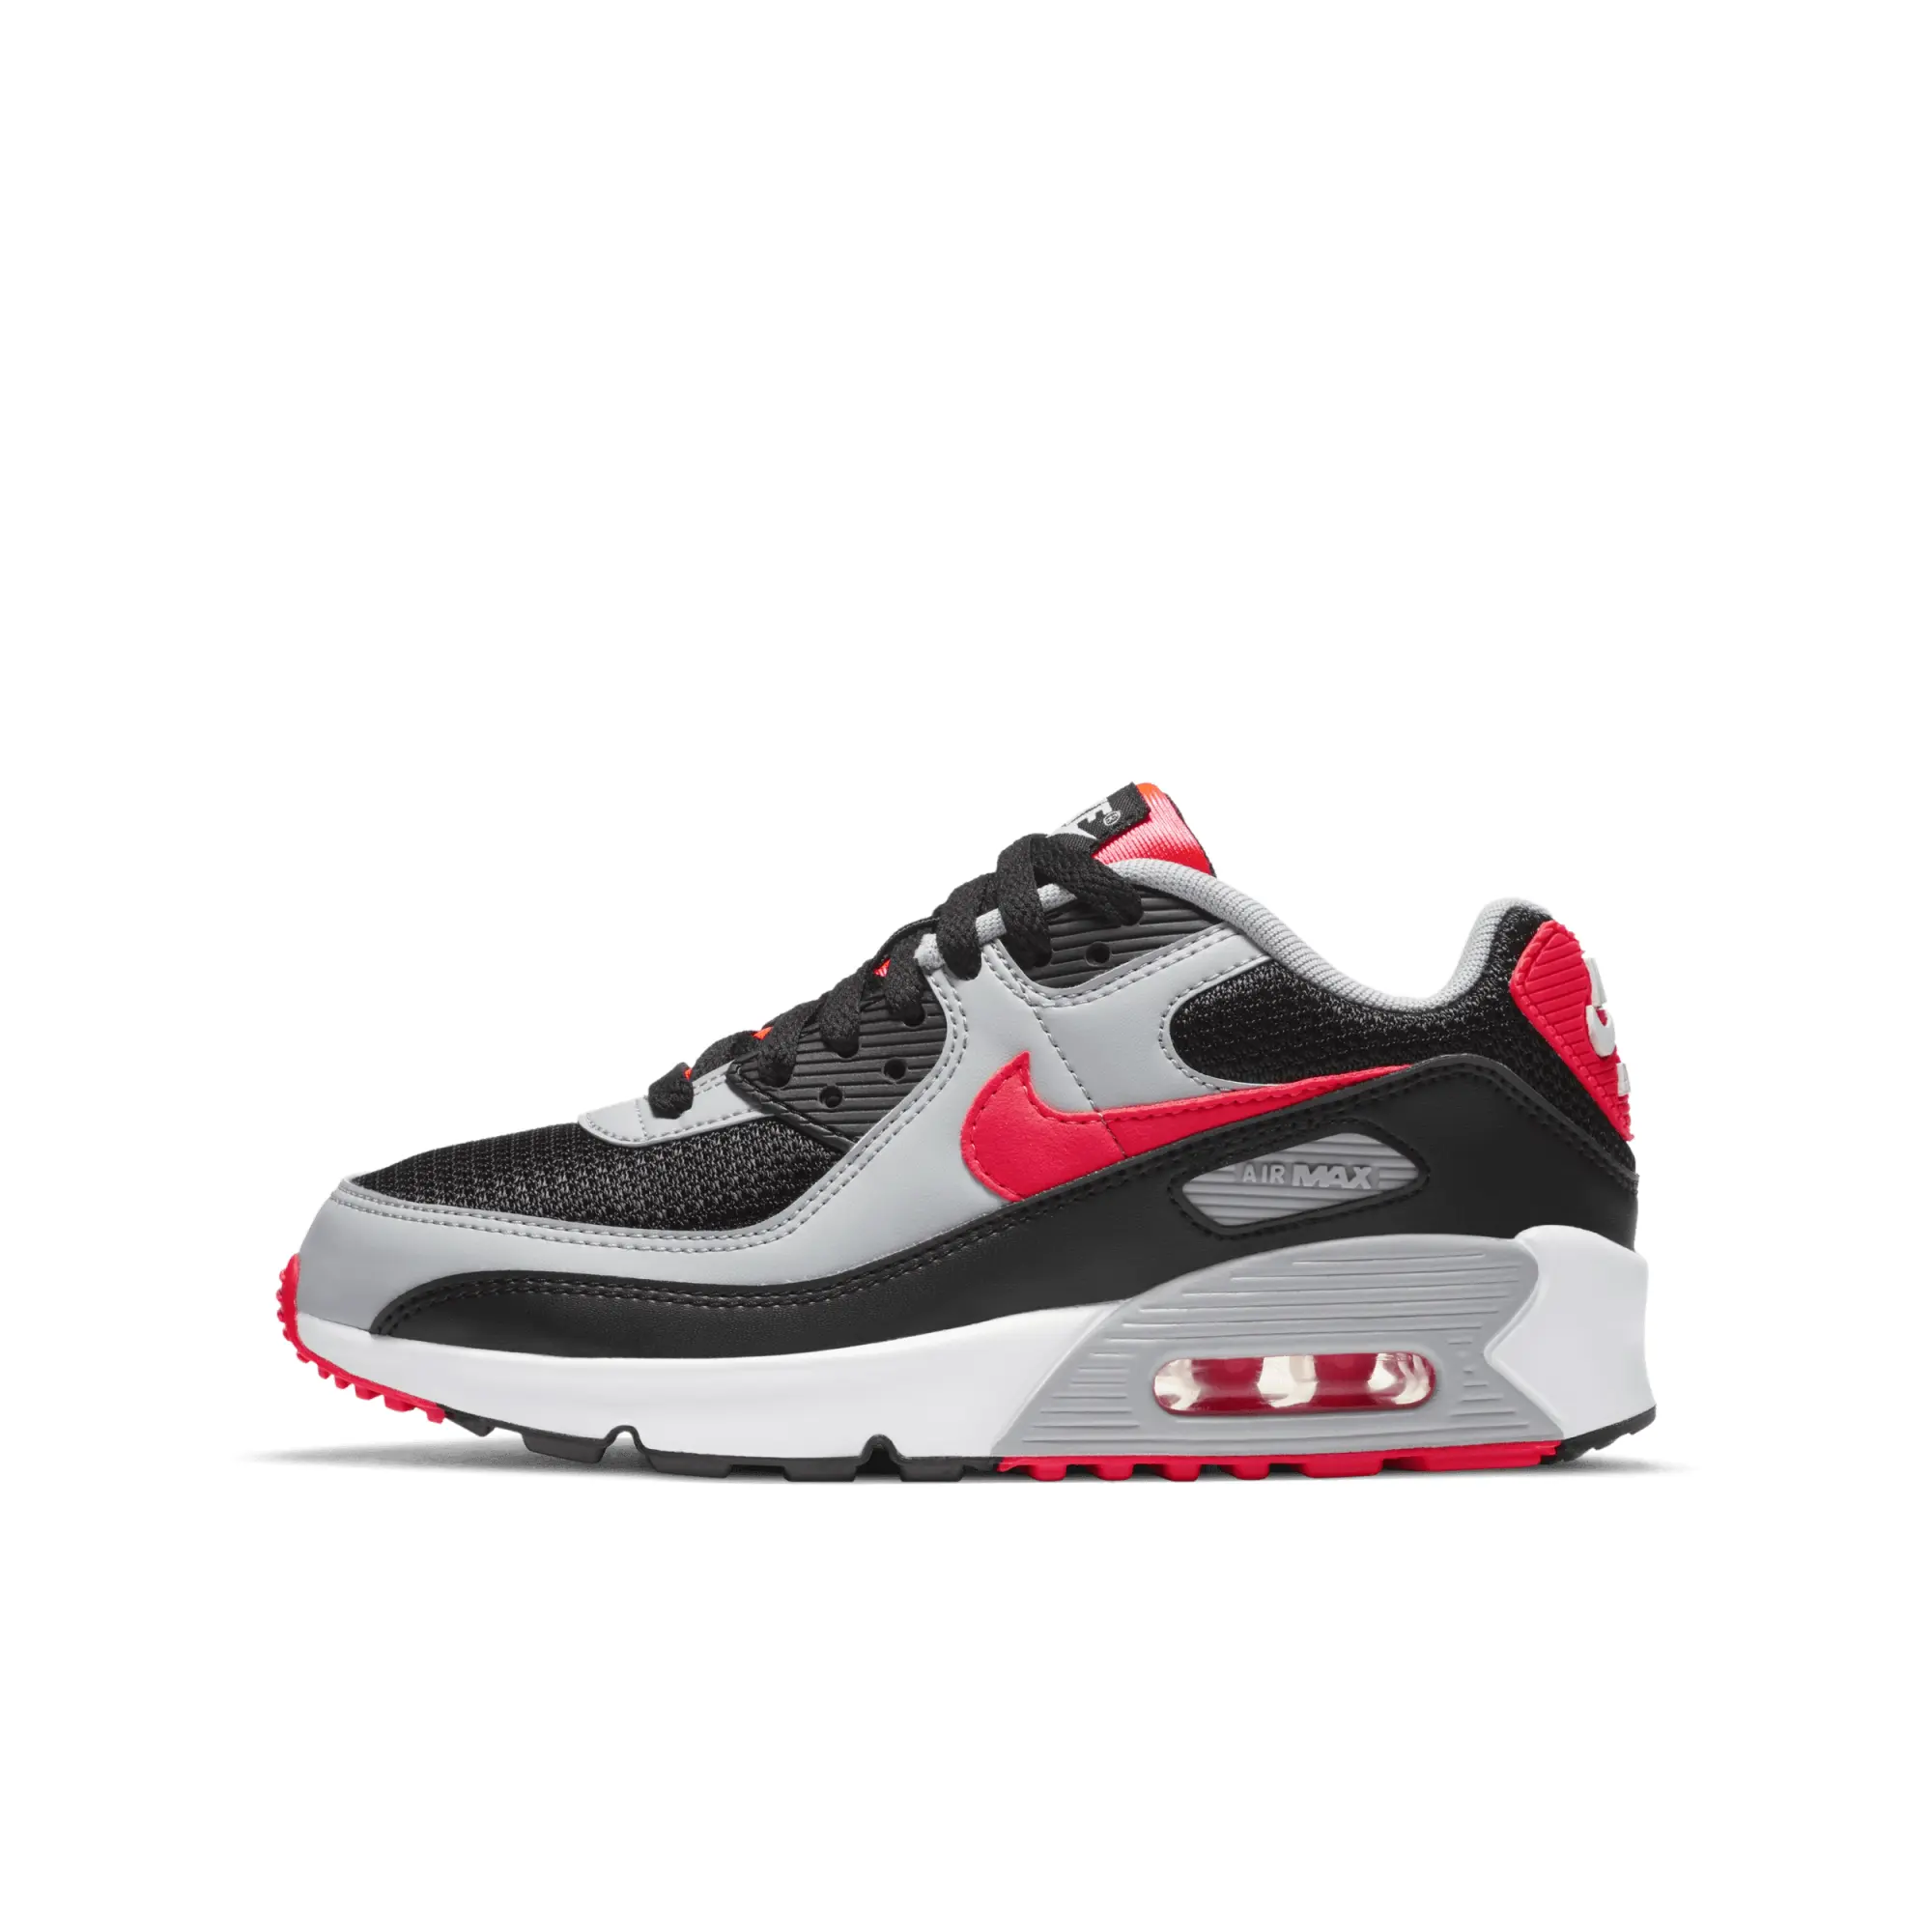 Nike black & red air max 90 ltr Boys Youth Trainers